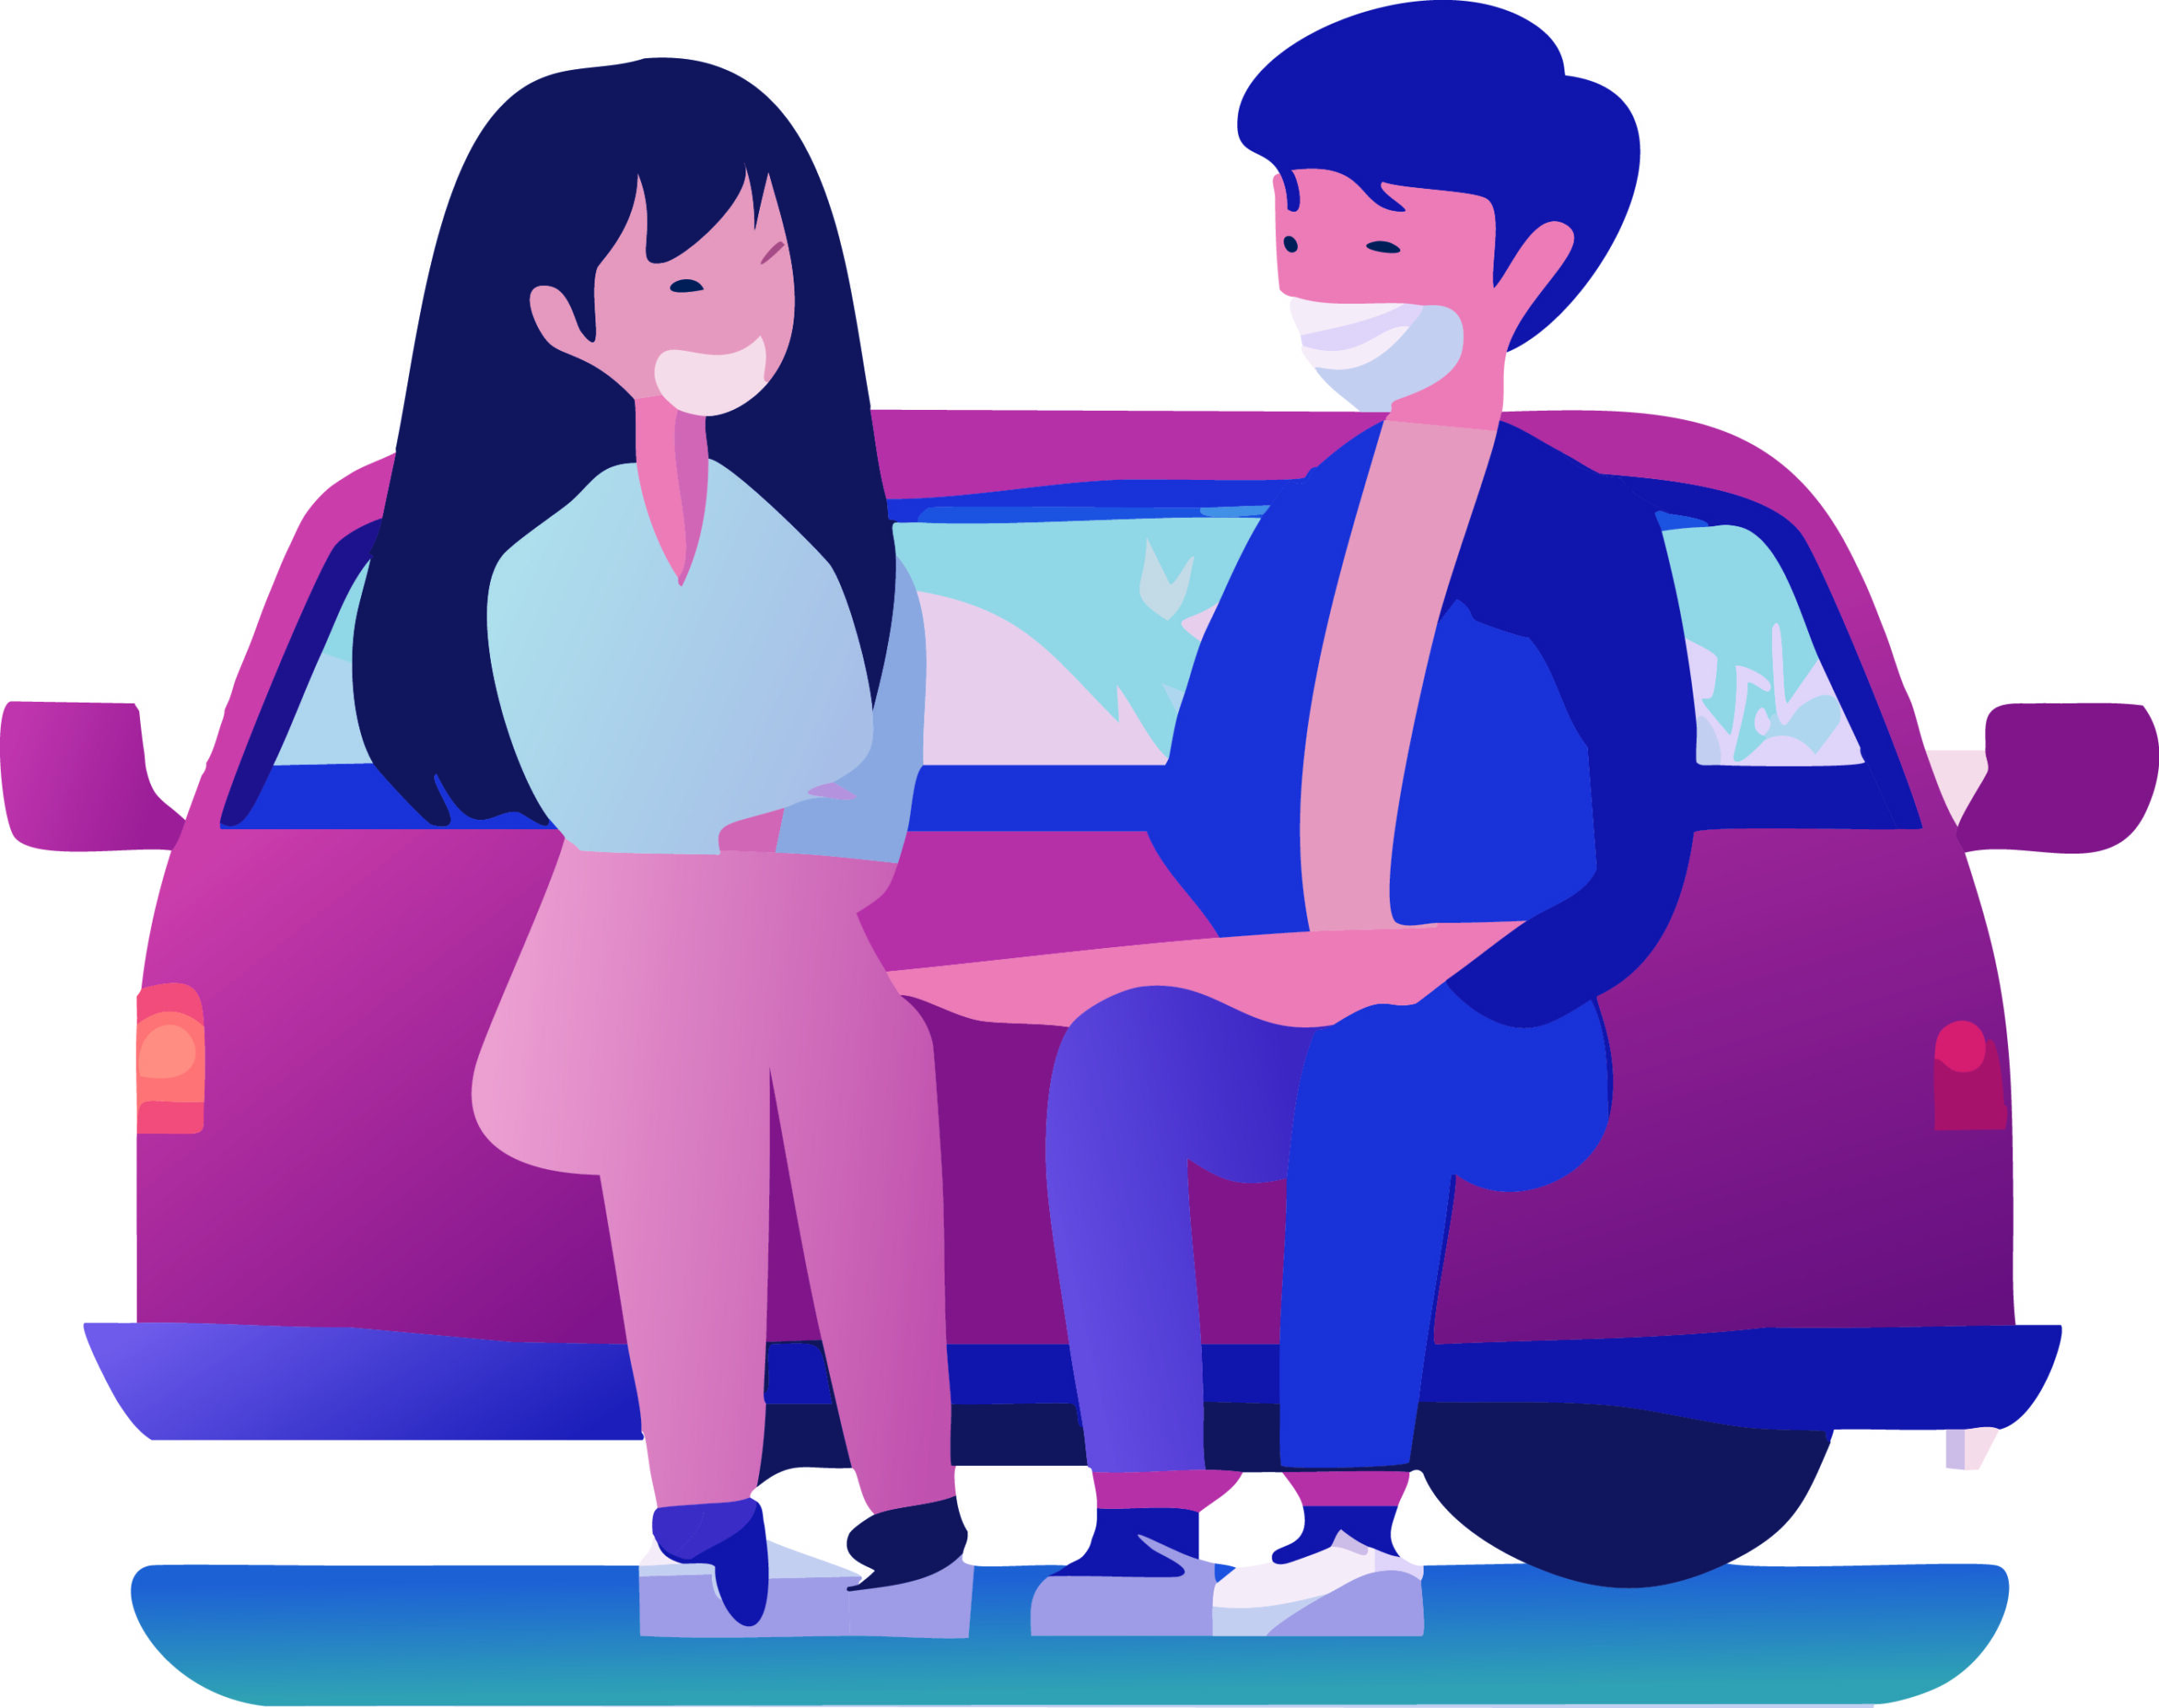 Digital illustration of two people sitting on a car talking.